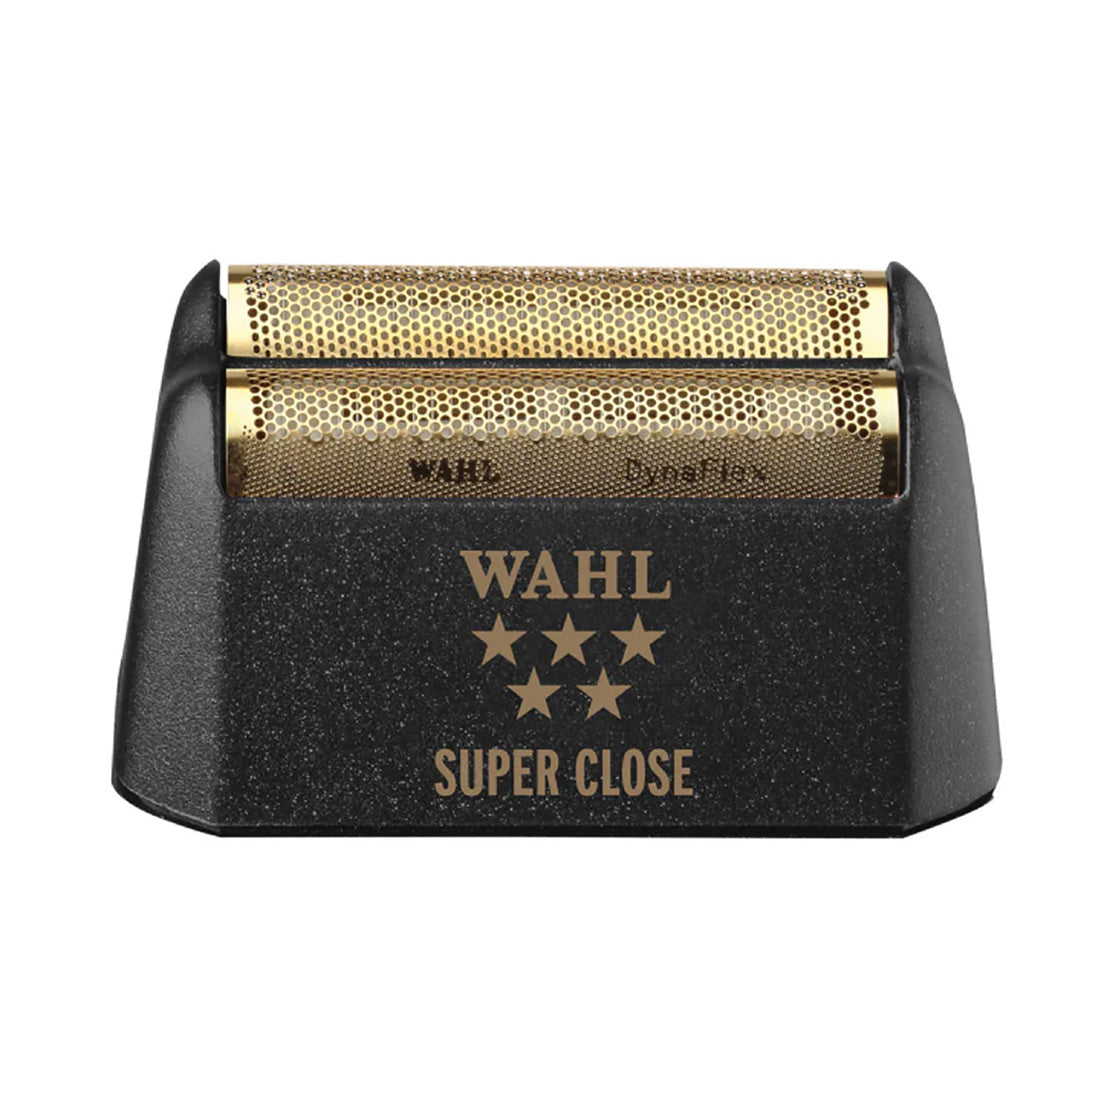 Wahl Finale Shaver Replacement Foil For 8164